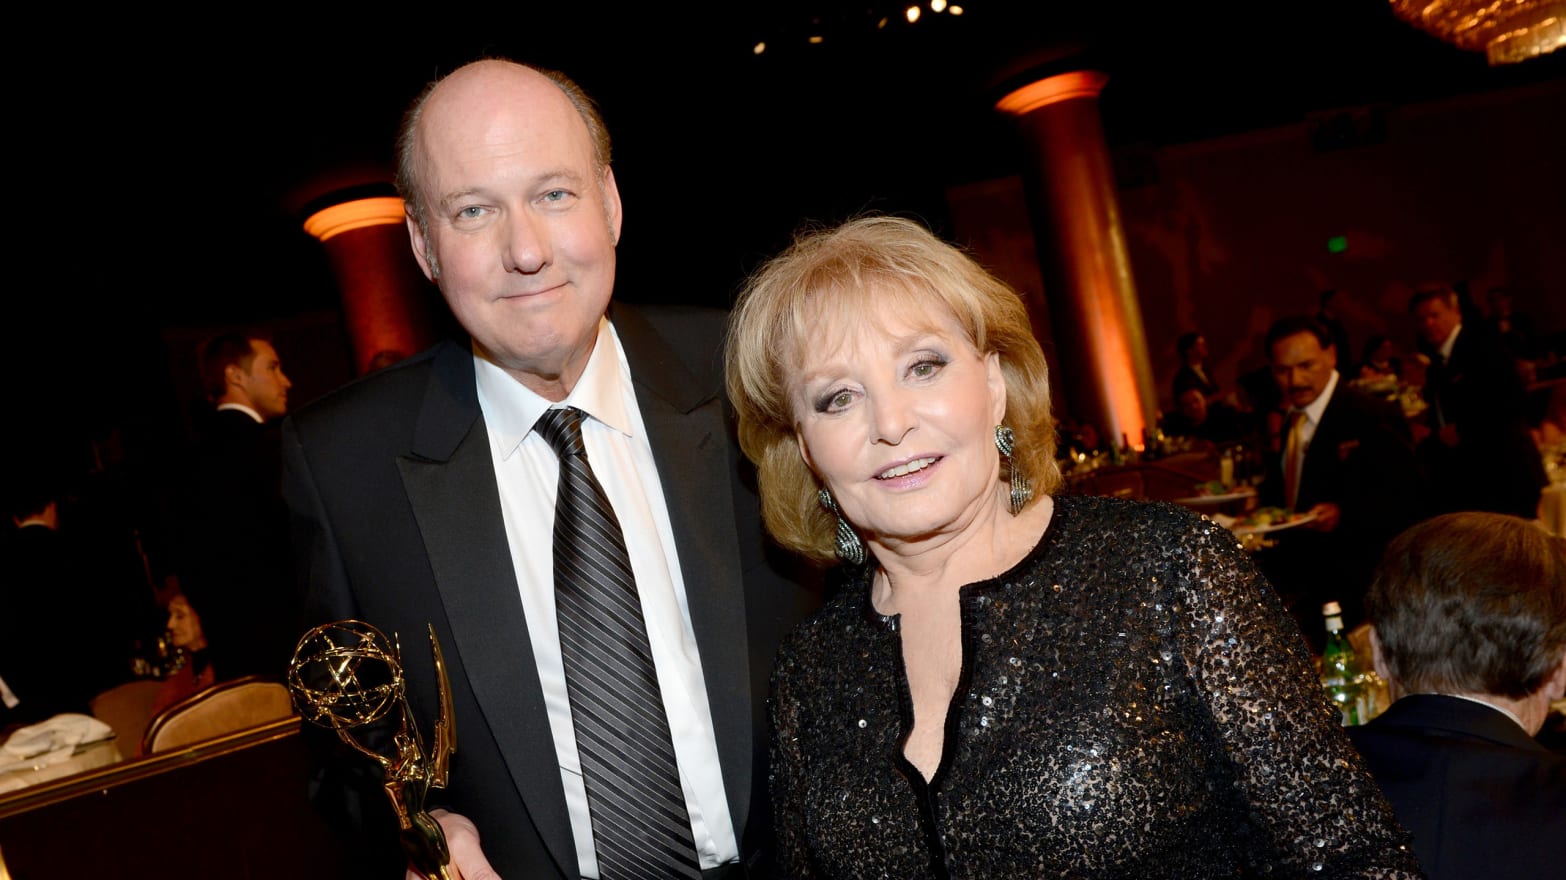 The Views Bloody Backstage Politics How Barbara Walters and Bill Geddie Lost Control of Their Show